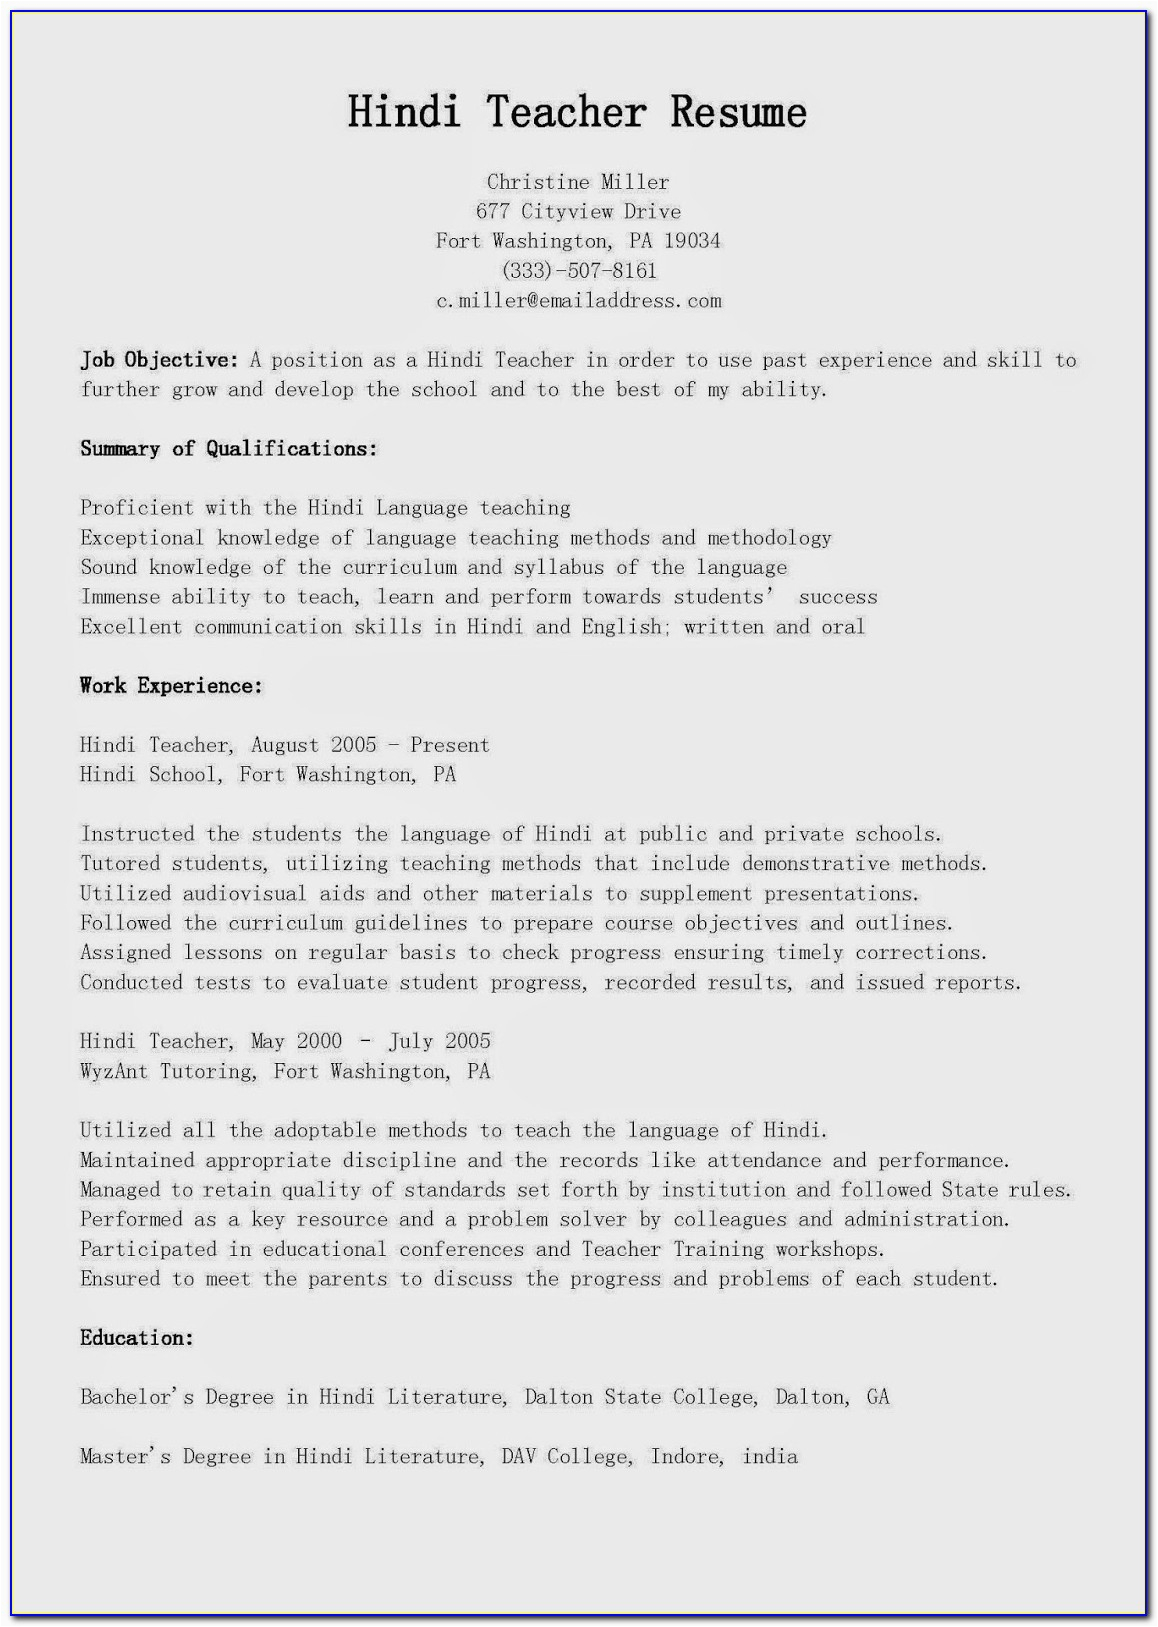 Sample Resume for Primary Teachers In India Indian Resume format Download Doc Blog Pointing In the Right Direction